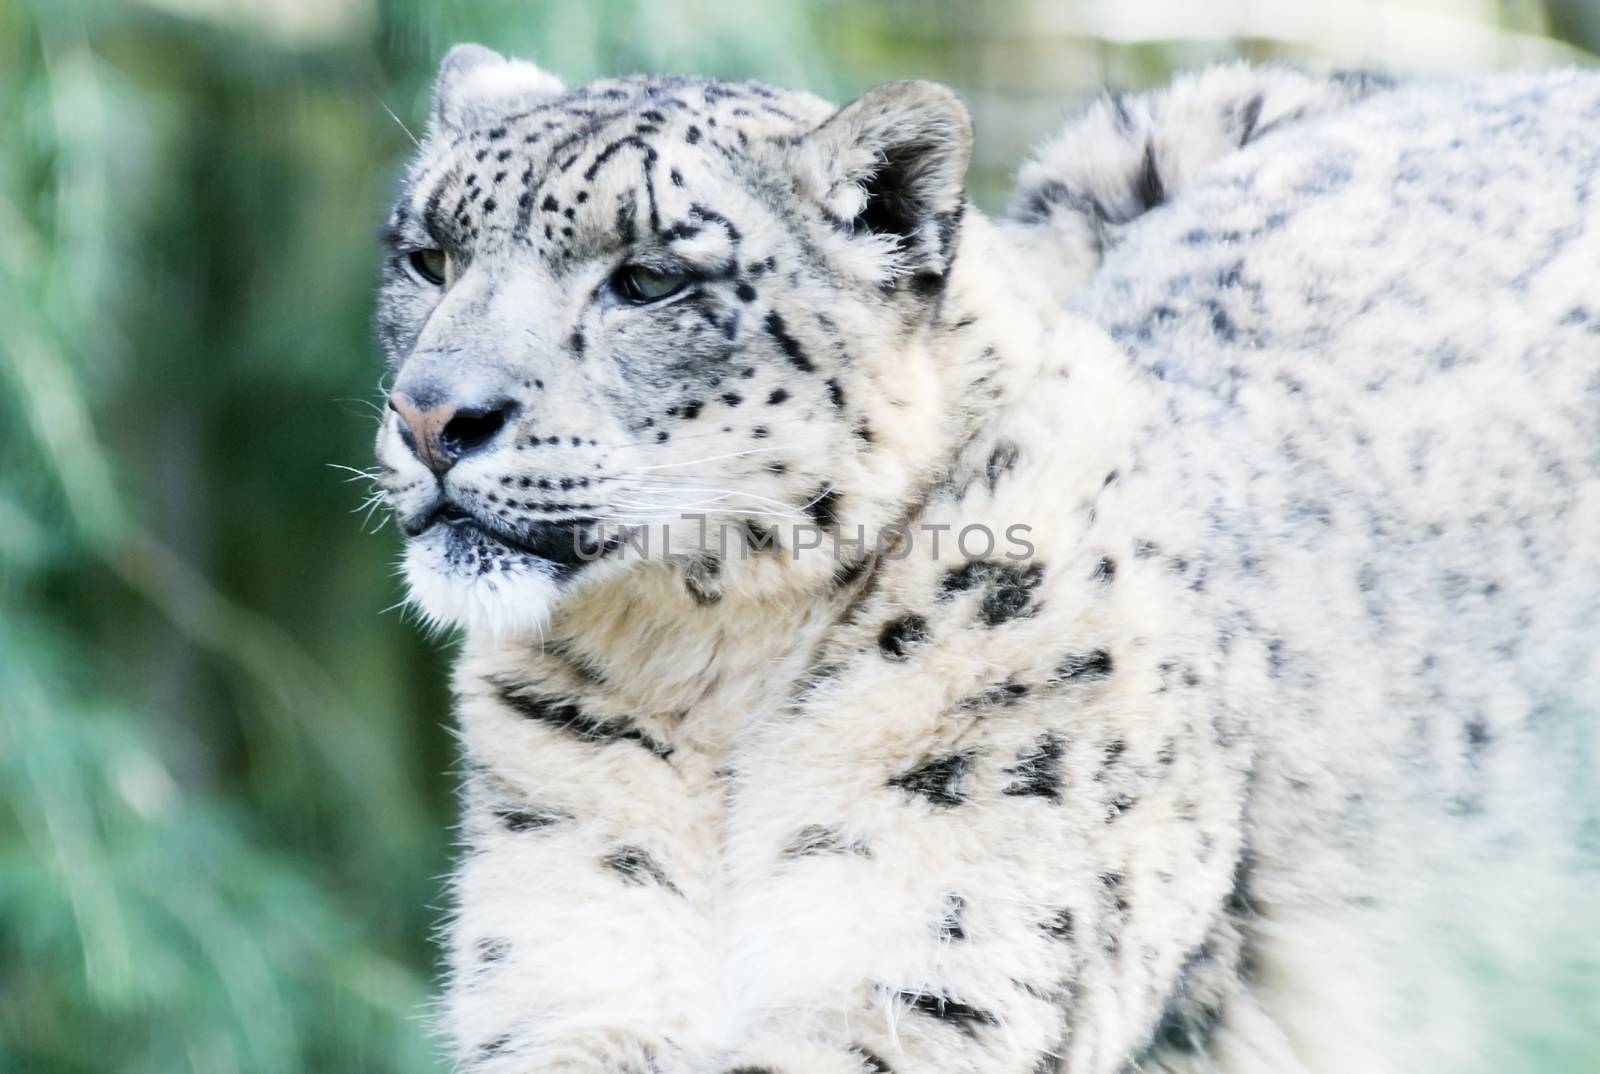 Snow Leopard Looking by kmwphotography